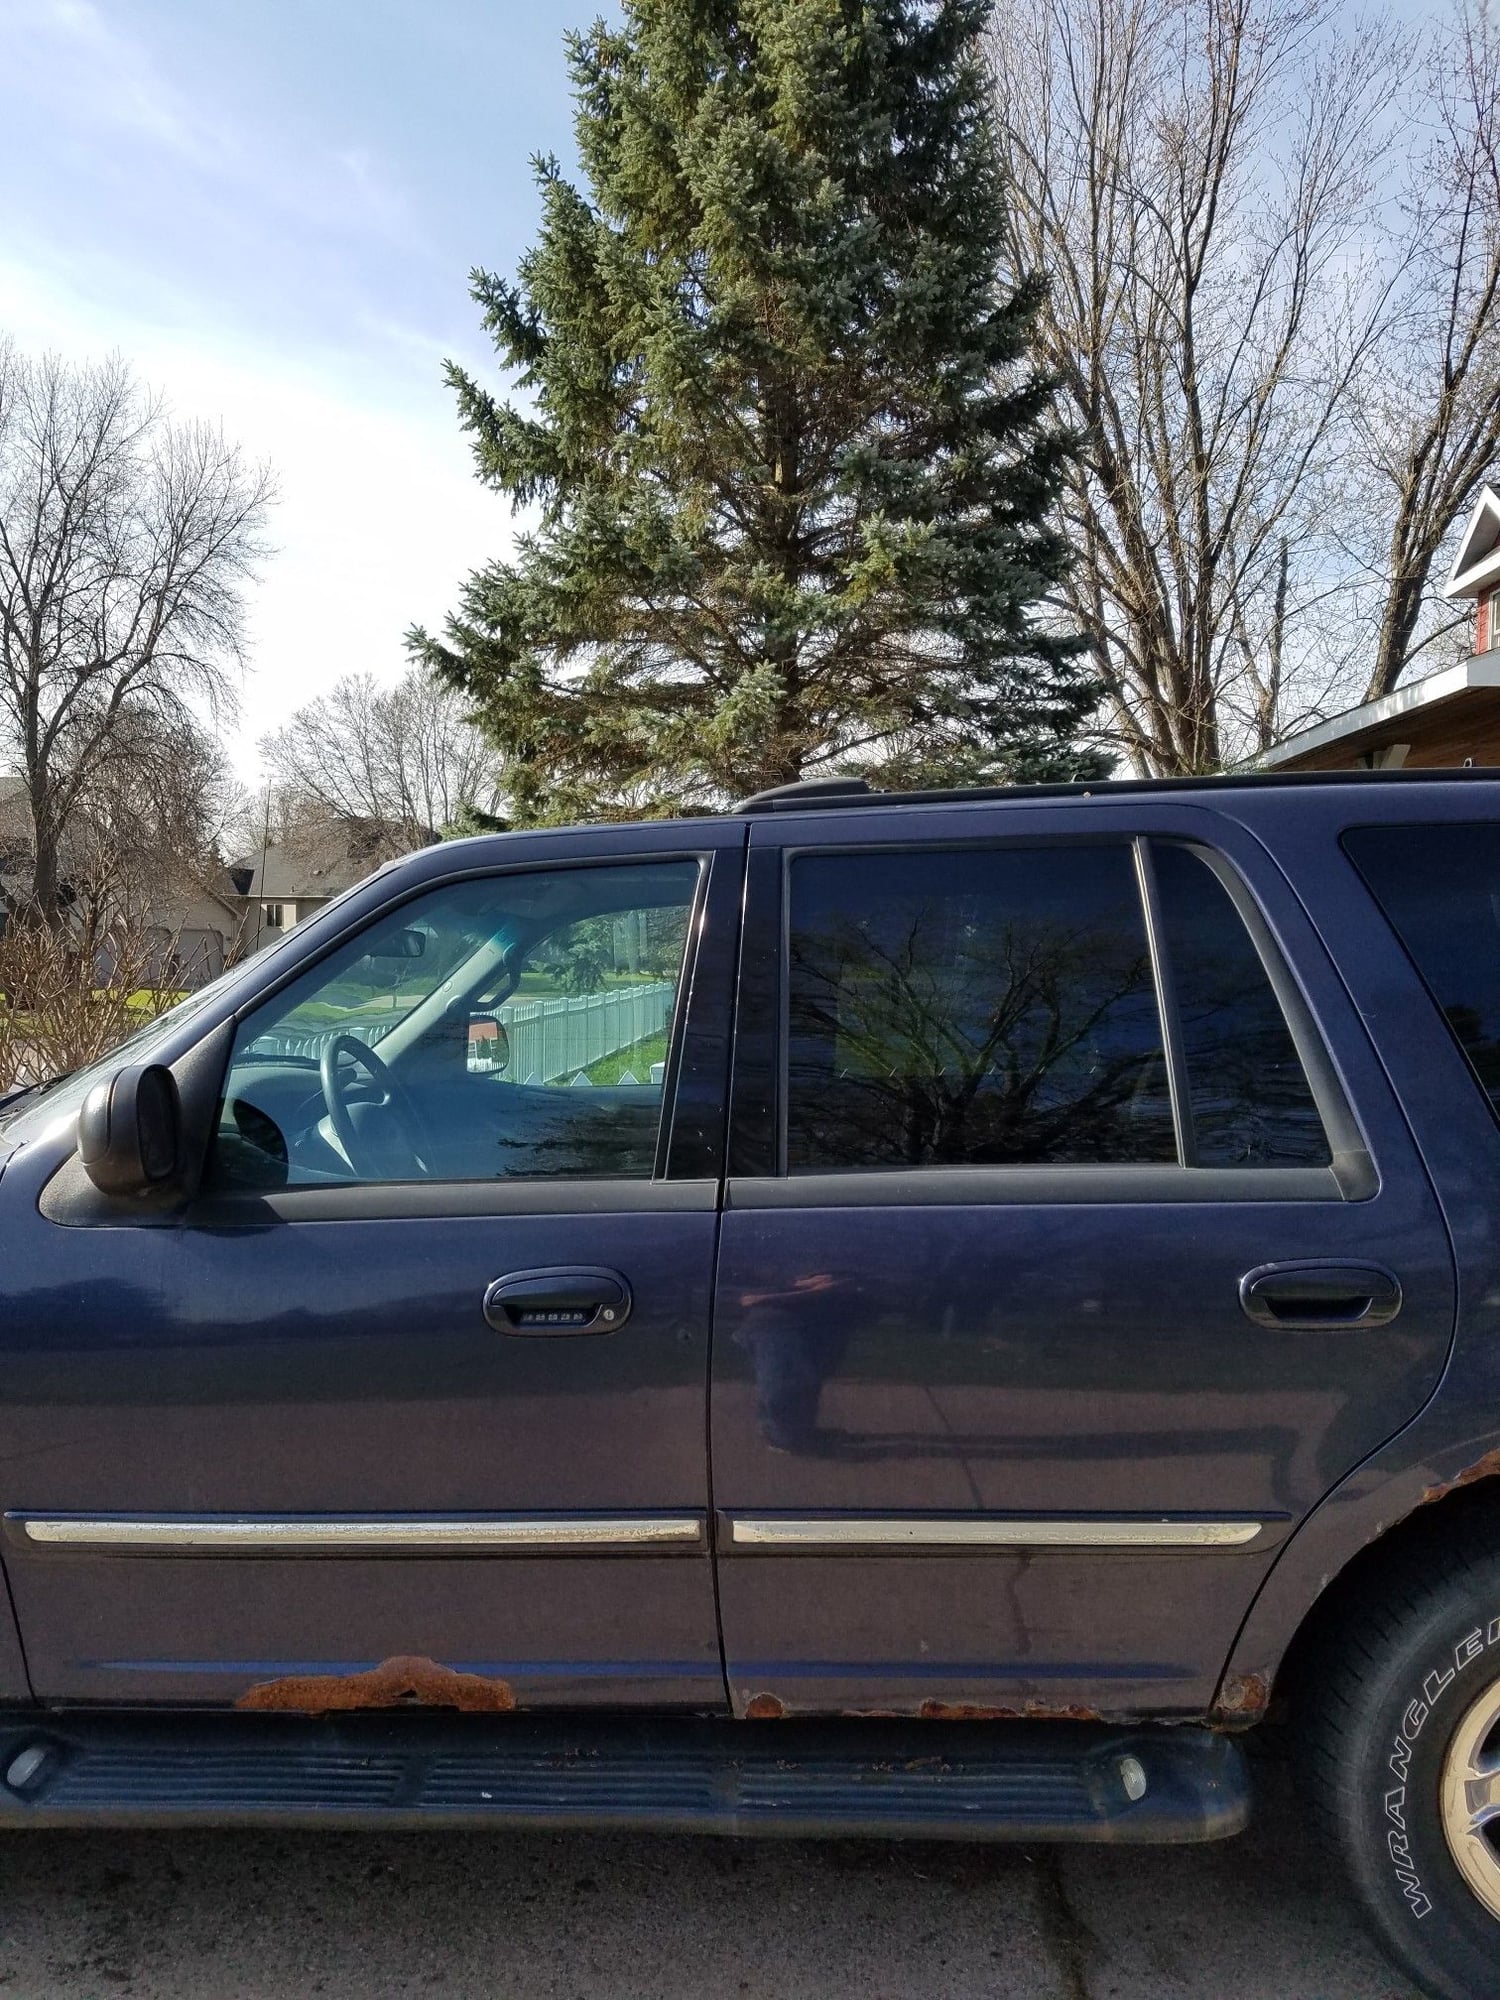 1999 Ford Expedition - 1999 Expedition - Used - VIN 1FMPU18L9XLC10866 - 164,000 Miles - 8 cyl - 4WD - Automatic - SUV - Blue - Forest Lake, MN 55025, United States